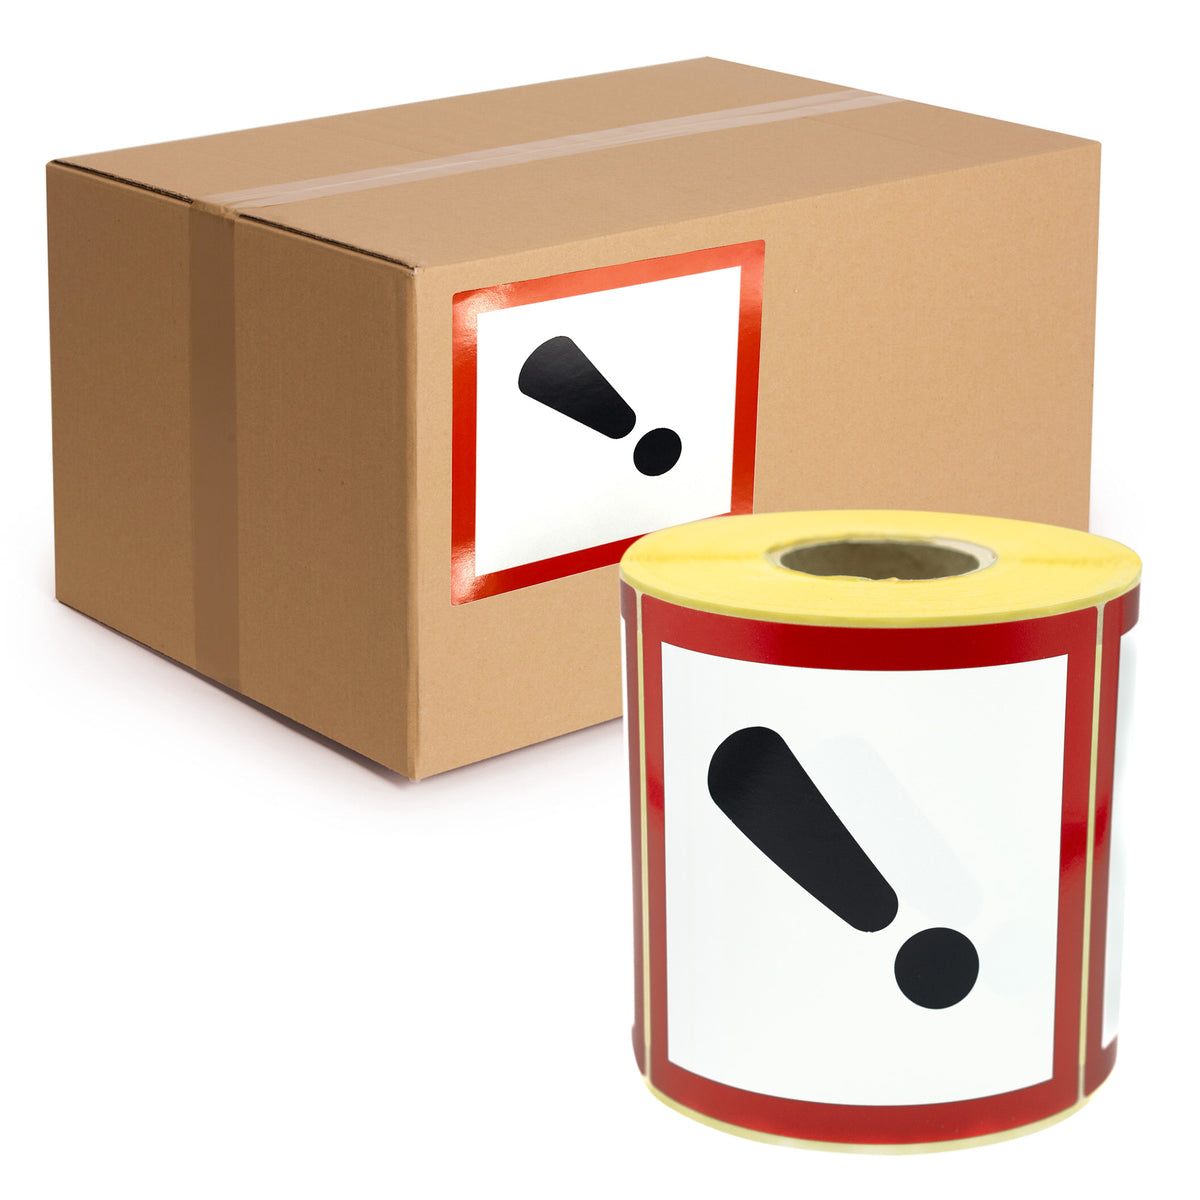 Warning labels GHS Symbol 07 Harmful to Health 100x100mm 500 per roll